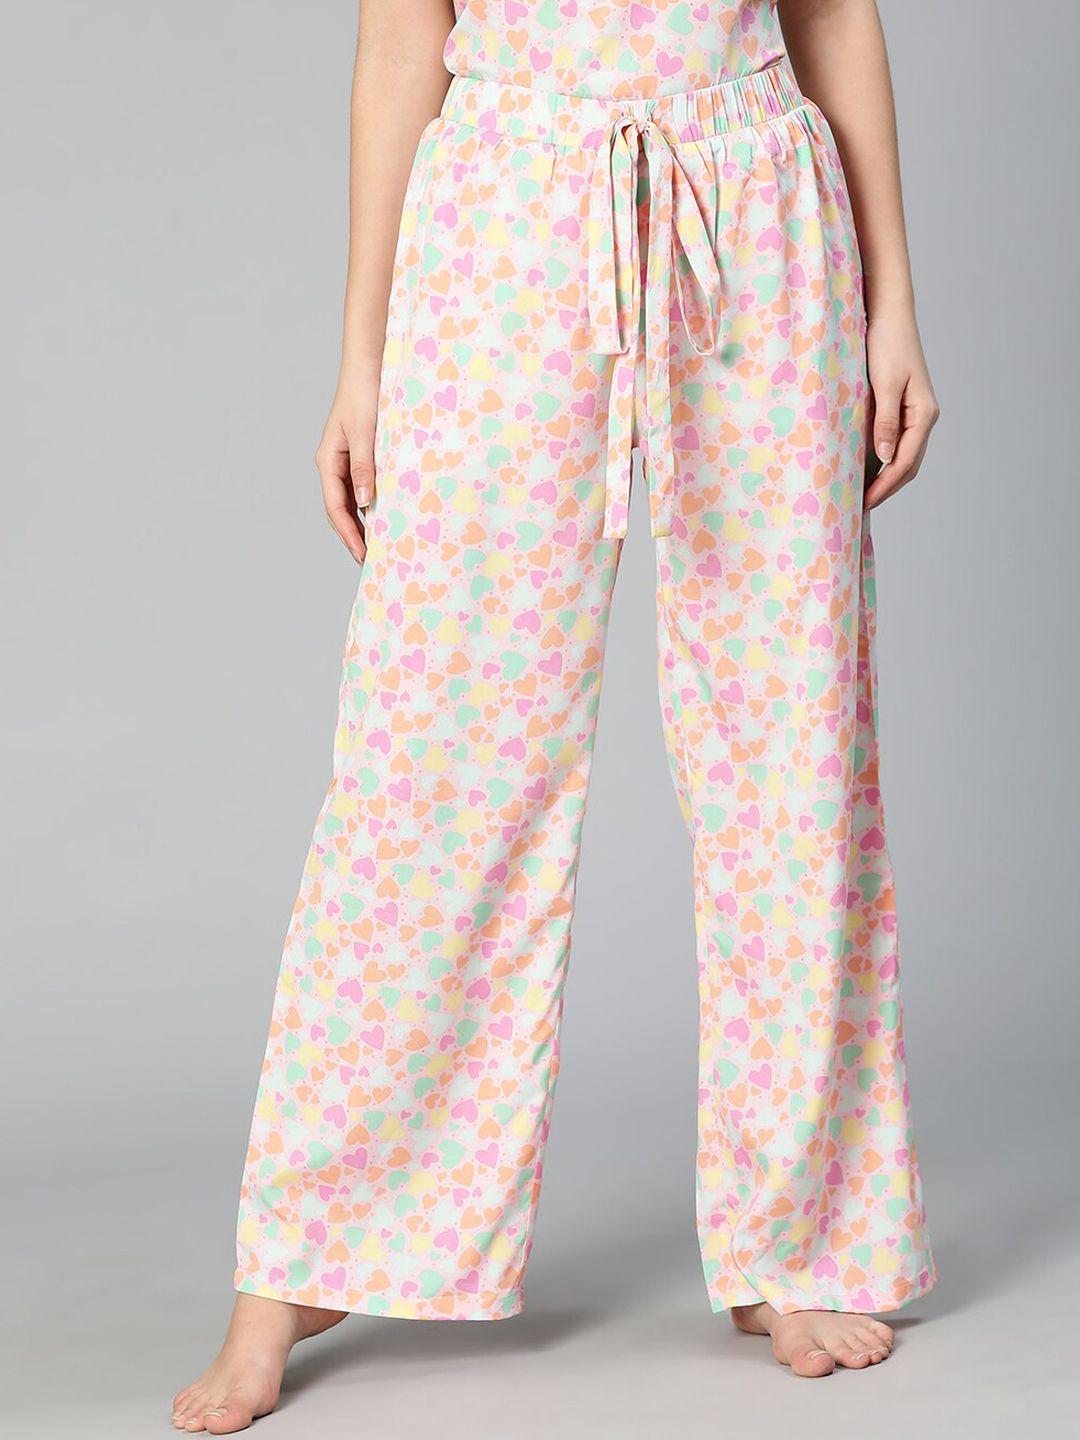 oxolloxo women pink heart printed flared lounge pants